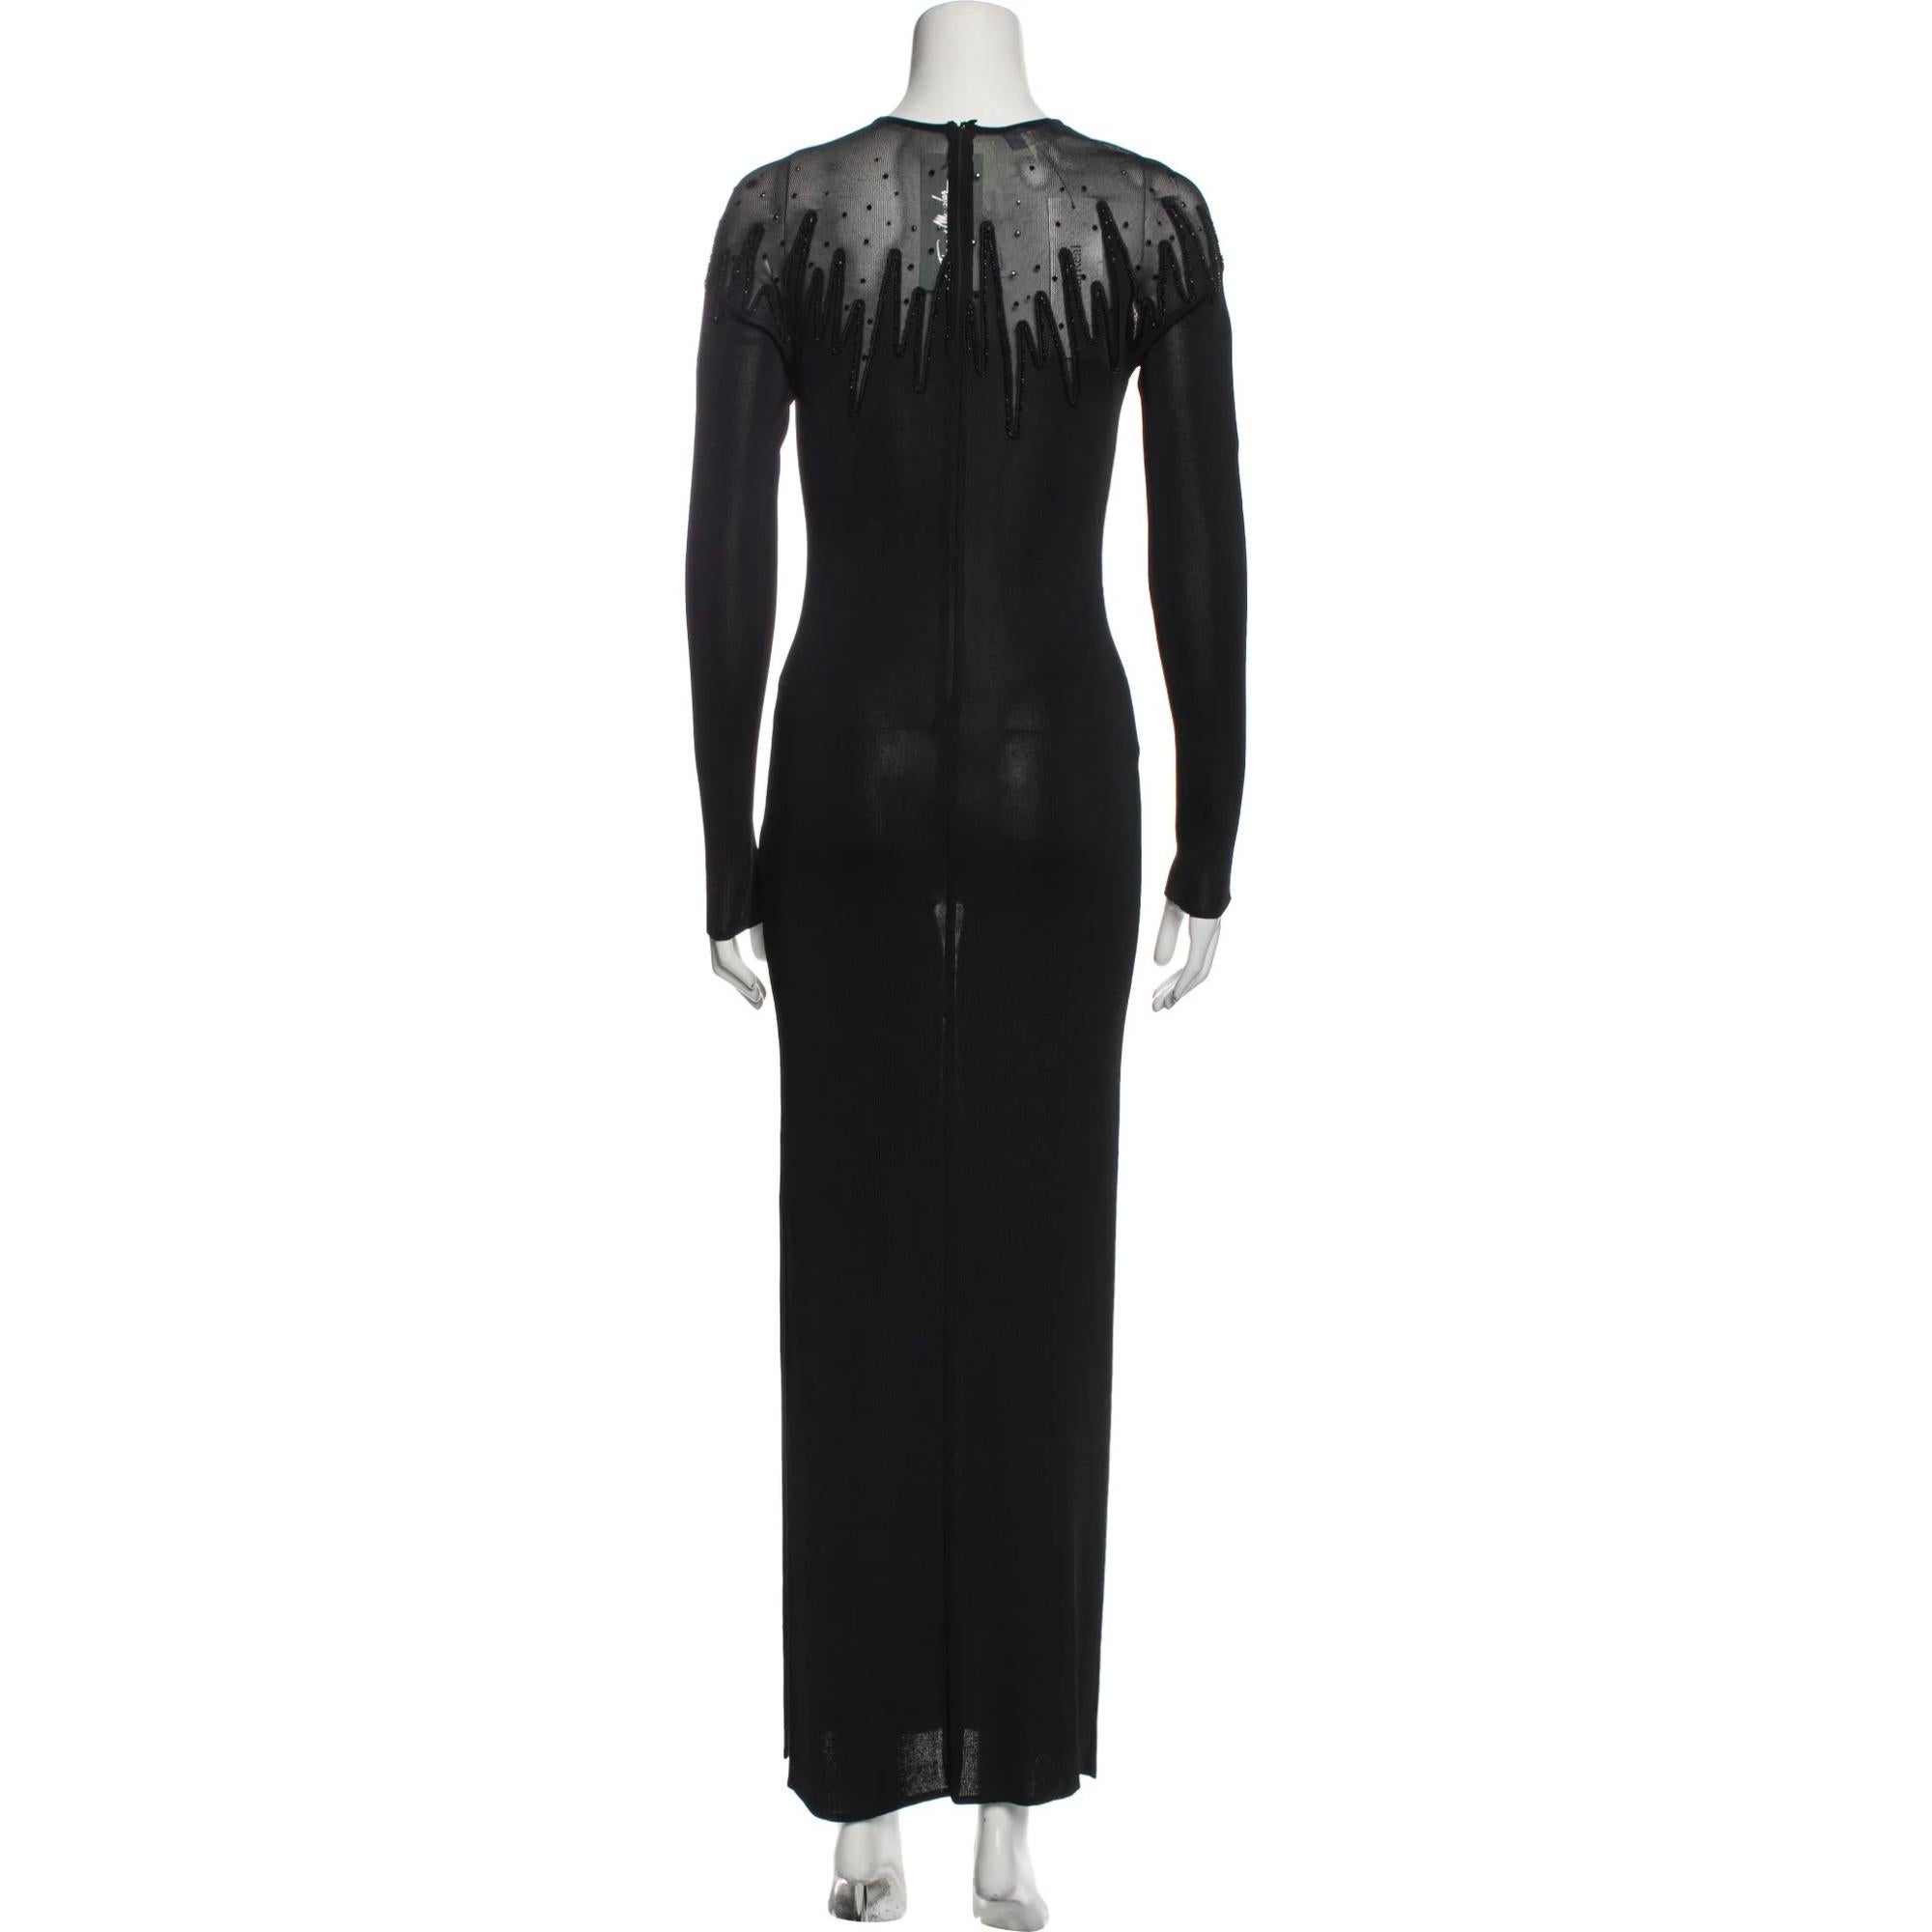 Thierry Mugler Vintage Embellished Black Long Dress (XS) In Good Condition For Sale In Montreal, Quebec